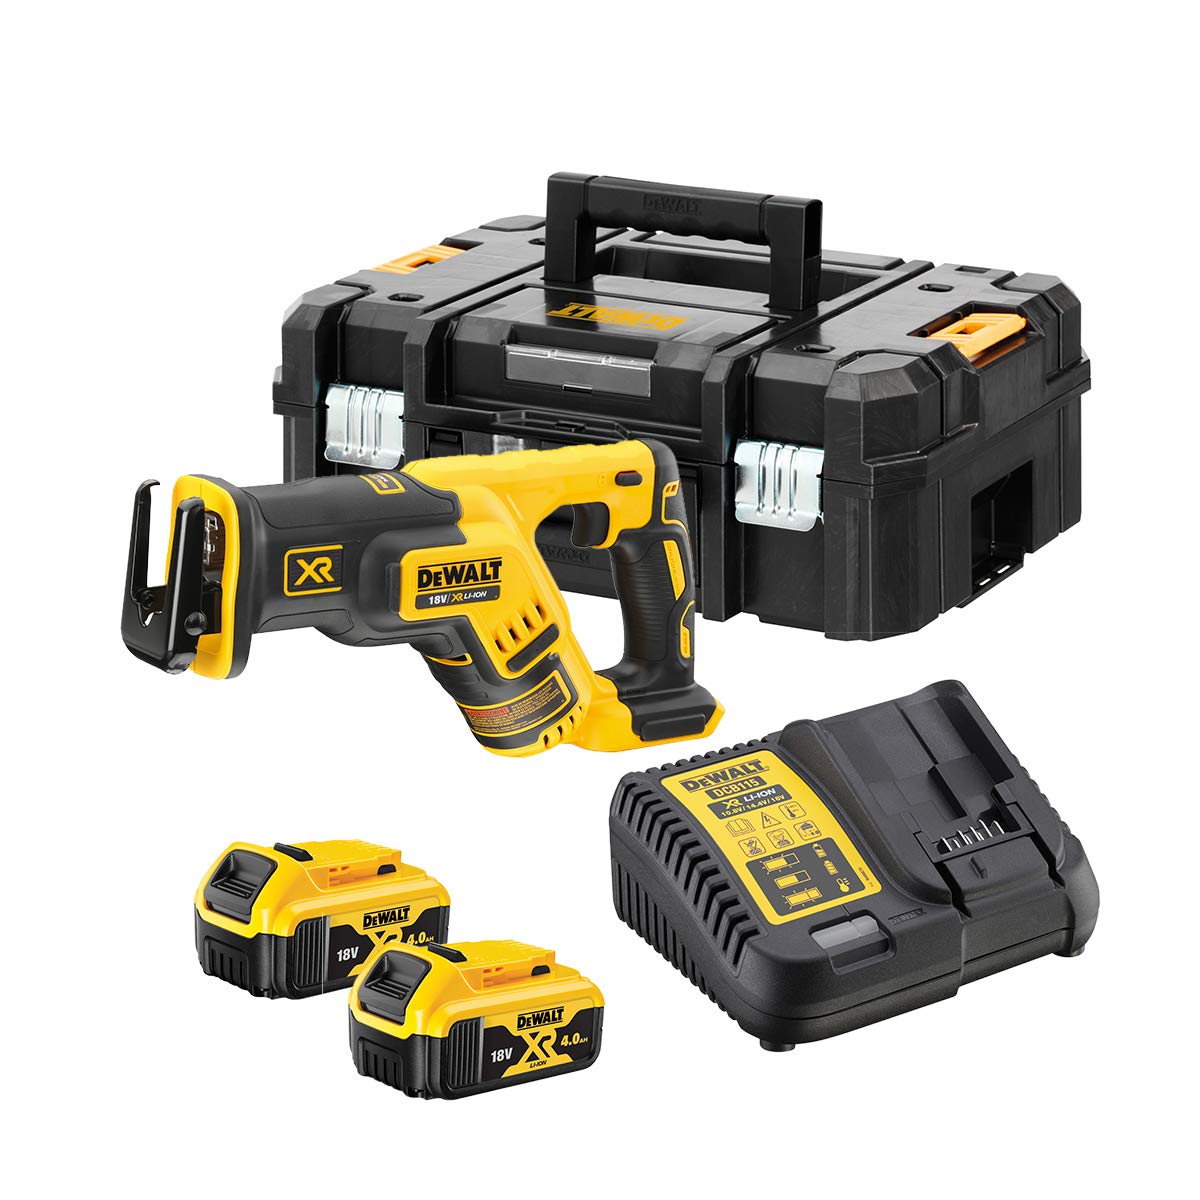 DEWALT DCS367P2 18V 29mm XR Li-ion Cordless Reciprocating Saw with brushless motor-2x5.0 Ah Batteries included